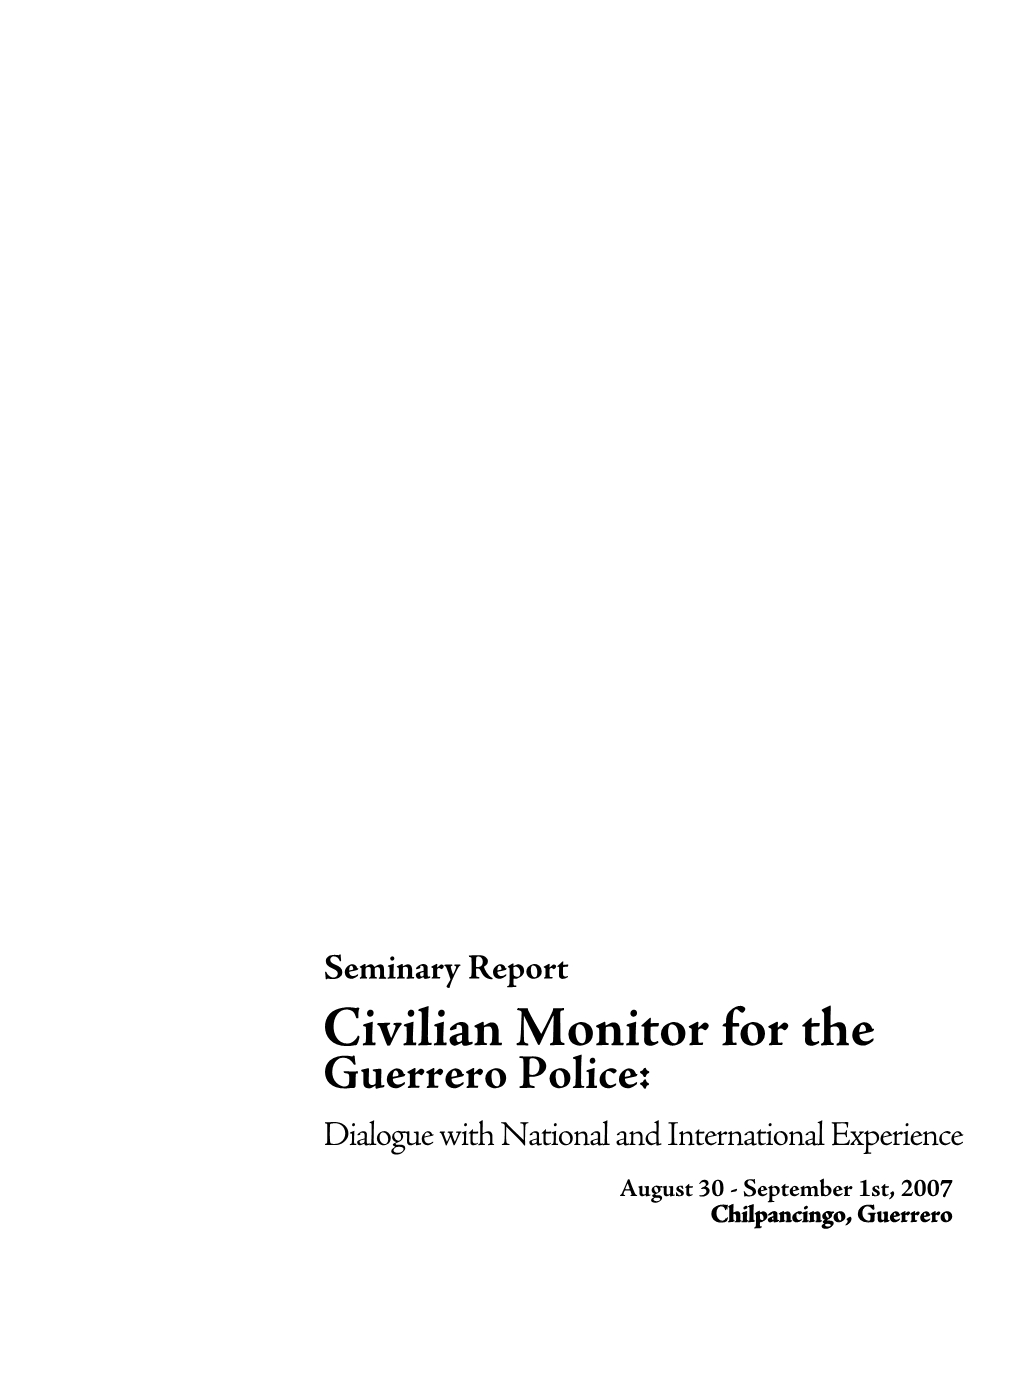 7 Chilpancingo, Guerrero Seminary Report “Civilian Monitor for the Guerrero Police: Dialogue with National and International Experience”